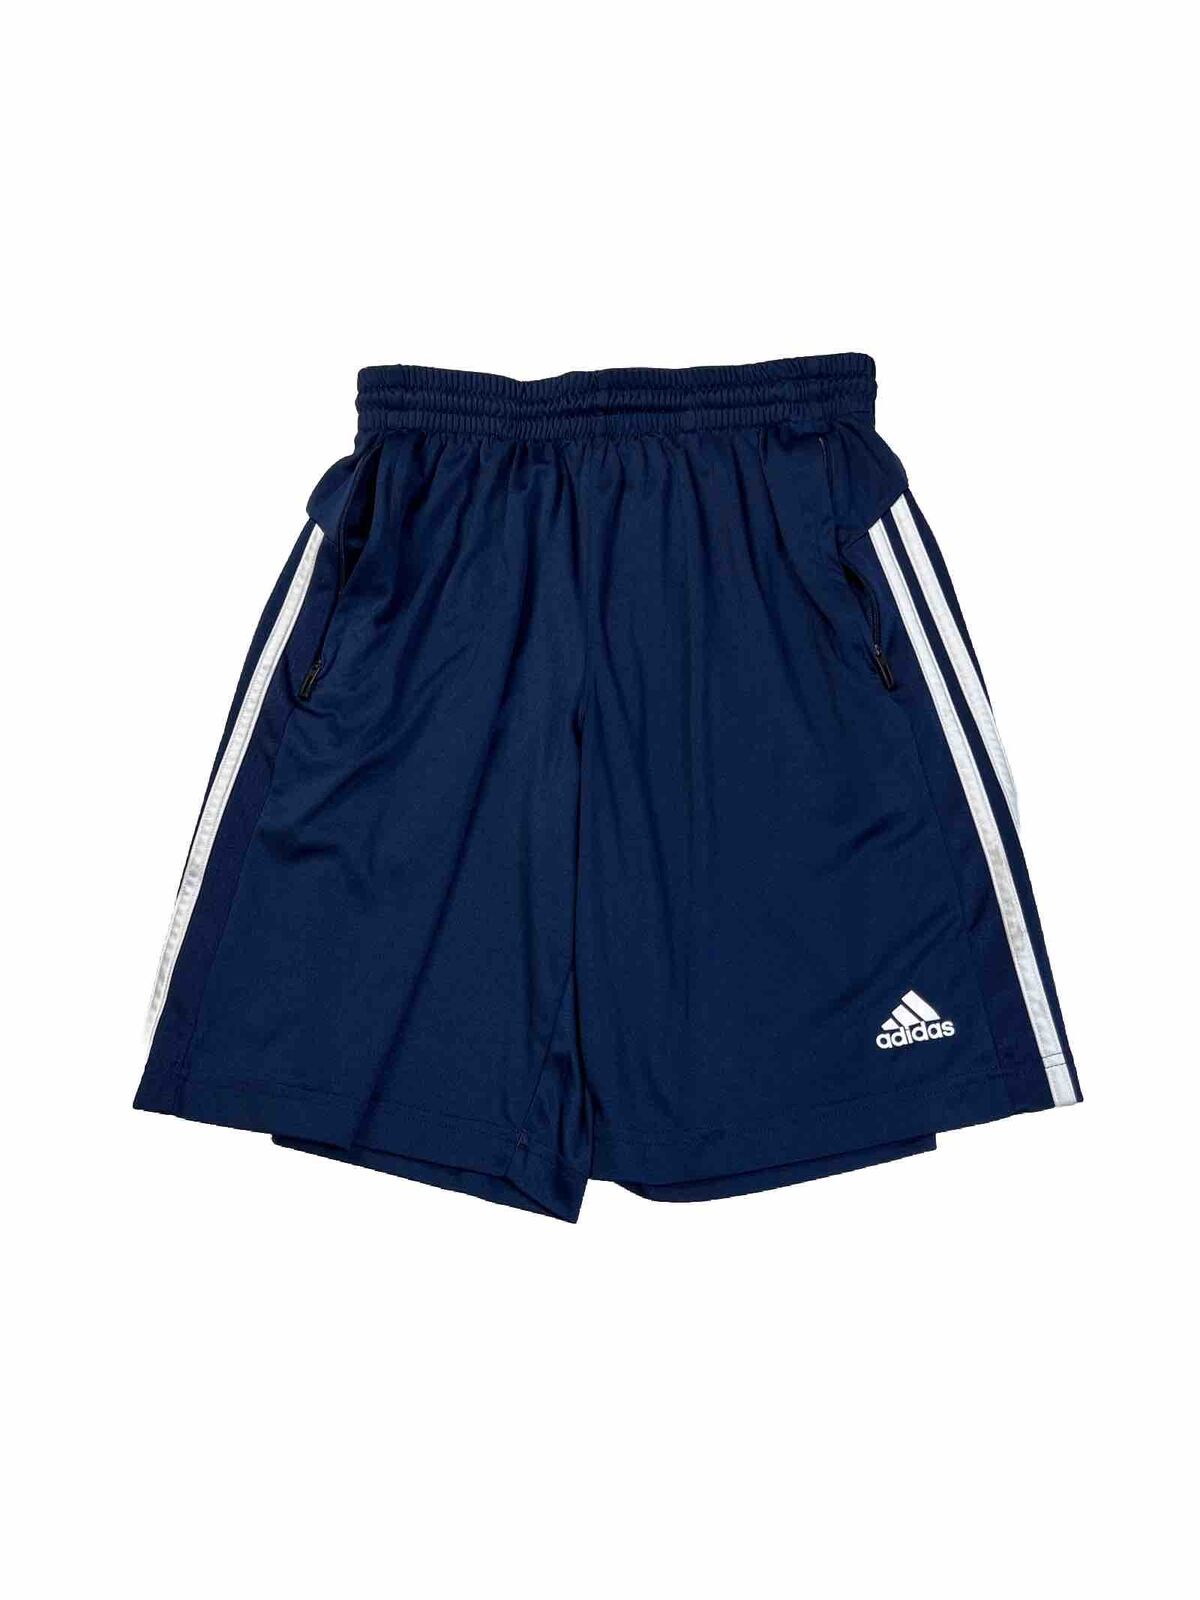 Adidas Men's Navy Blue Athletic Shorts with Zip Pockets - M